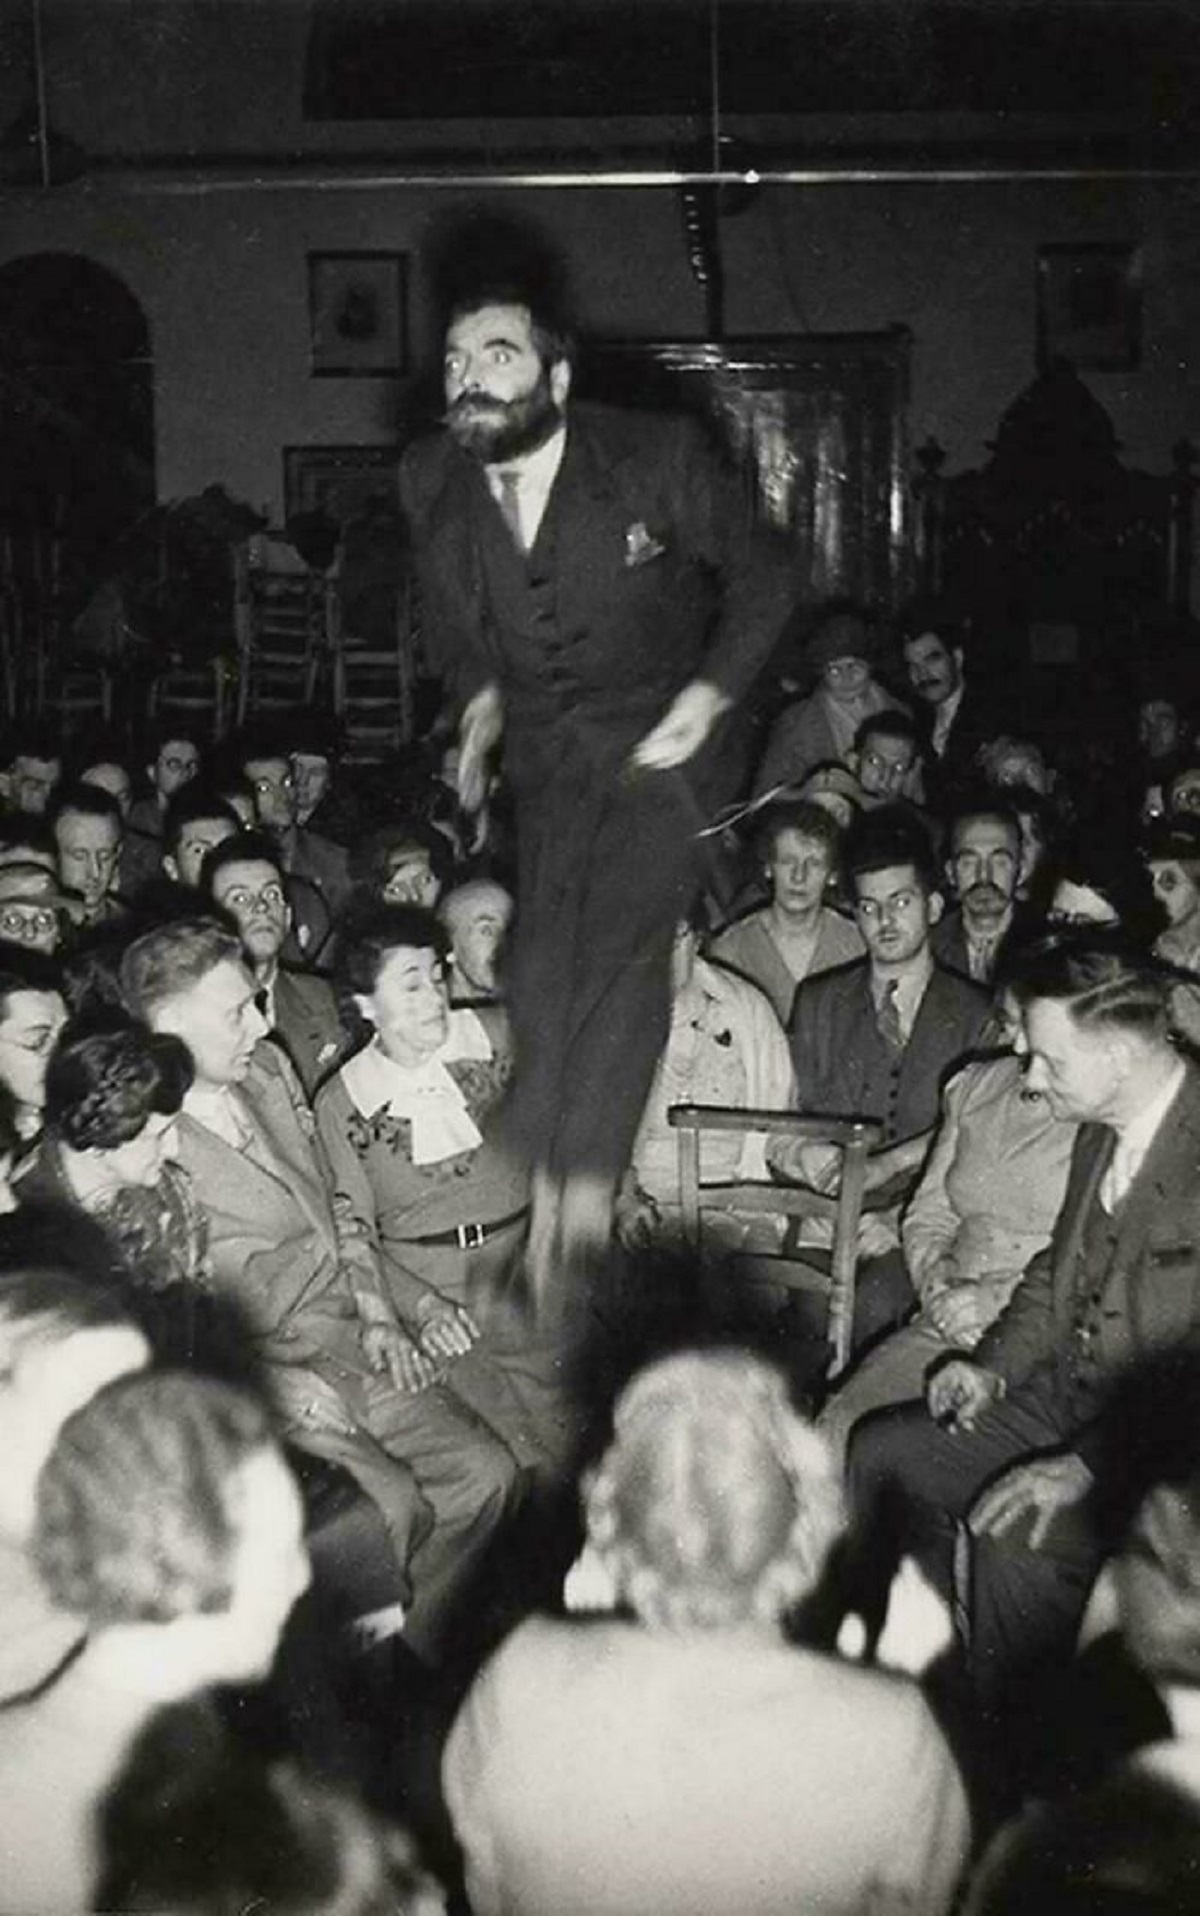 Welsh Spiritualist Colin Evans Feigns Levitation By Jumping Up And Down In Total Darkness And Filming Himself With An Infrared Camera. London, 1939